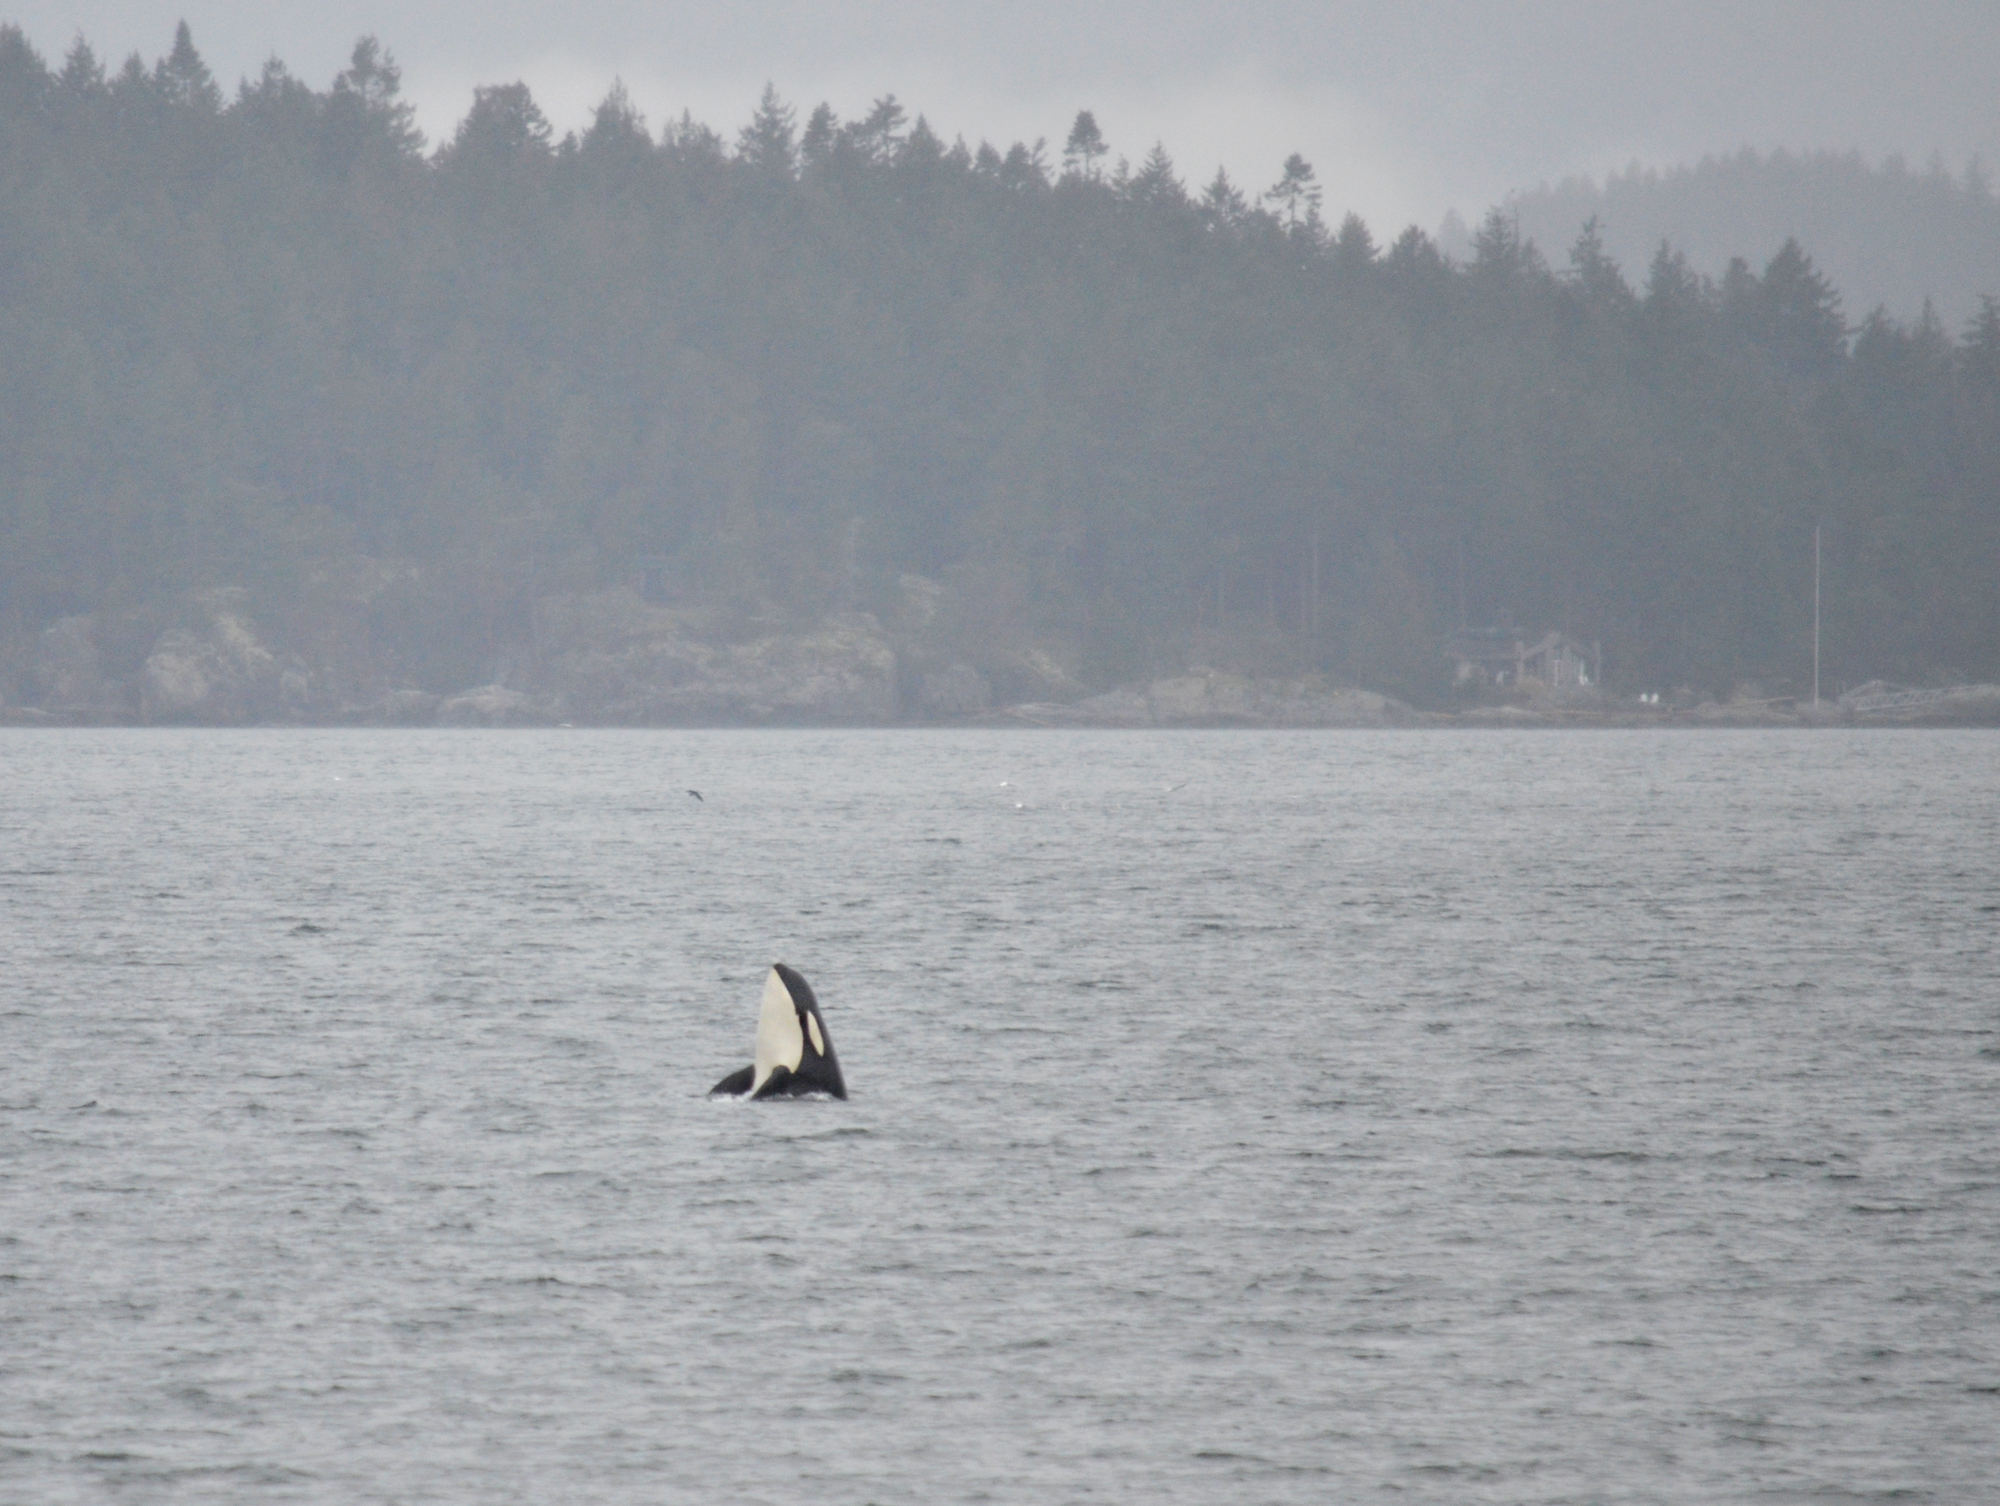 Northern Resident Orca Photo - Art By Di 2022